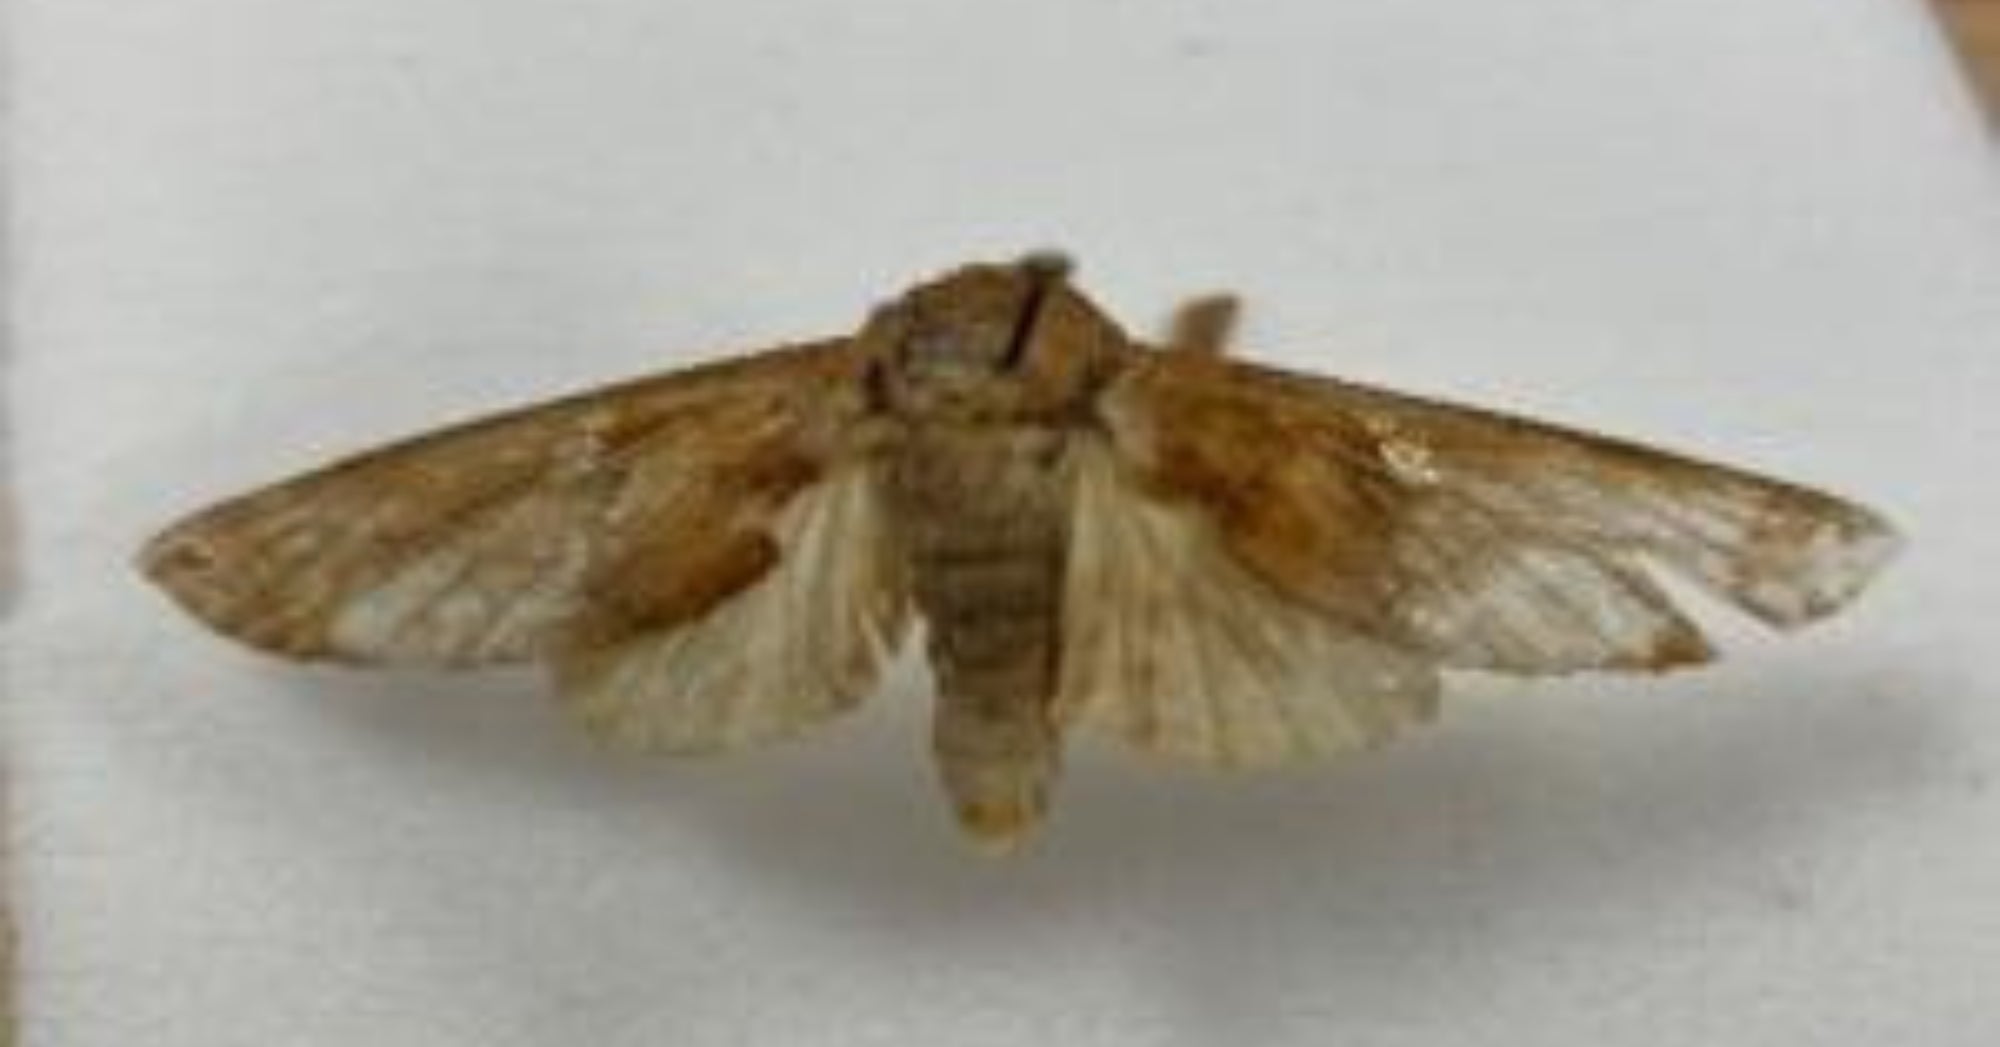 Rare moth found by CBP in Texas port coconut shipment | AGDAILY